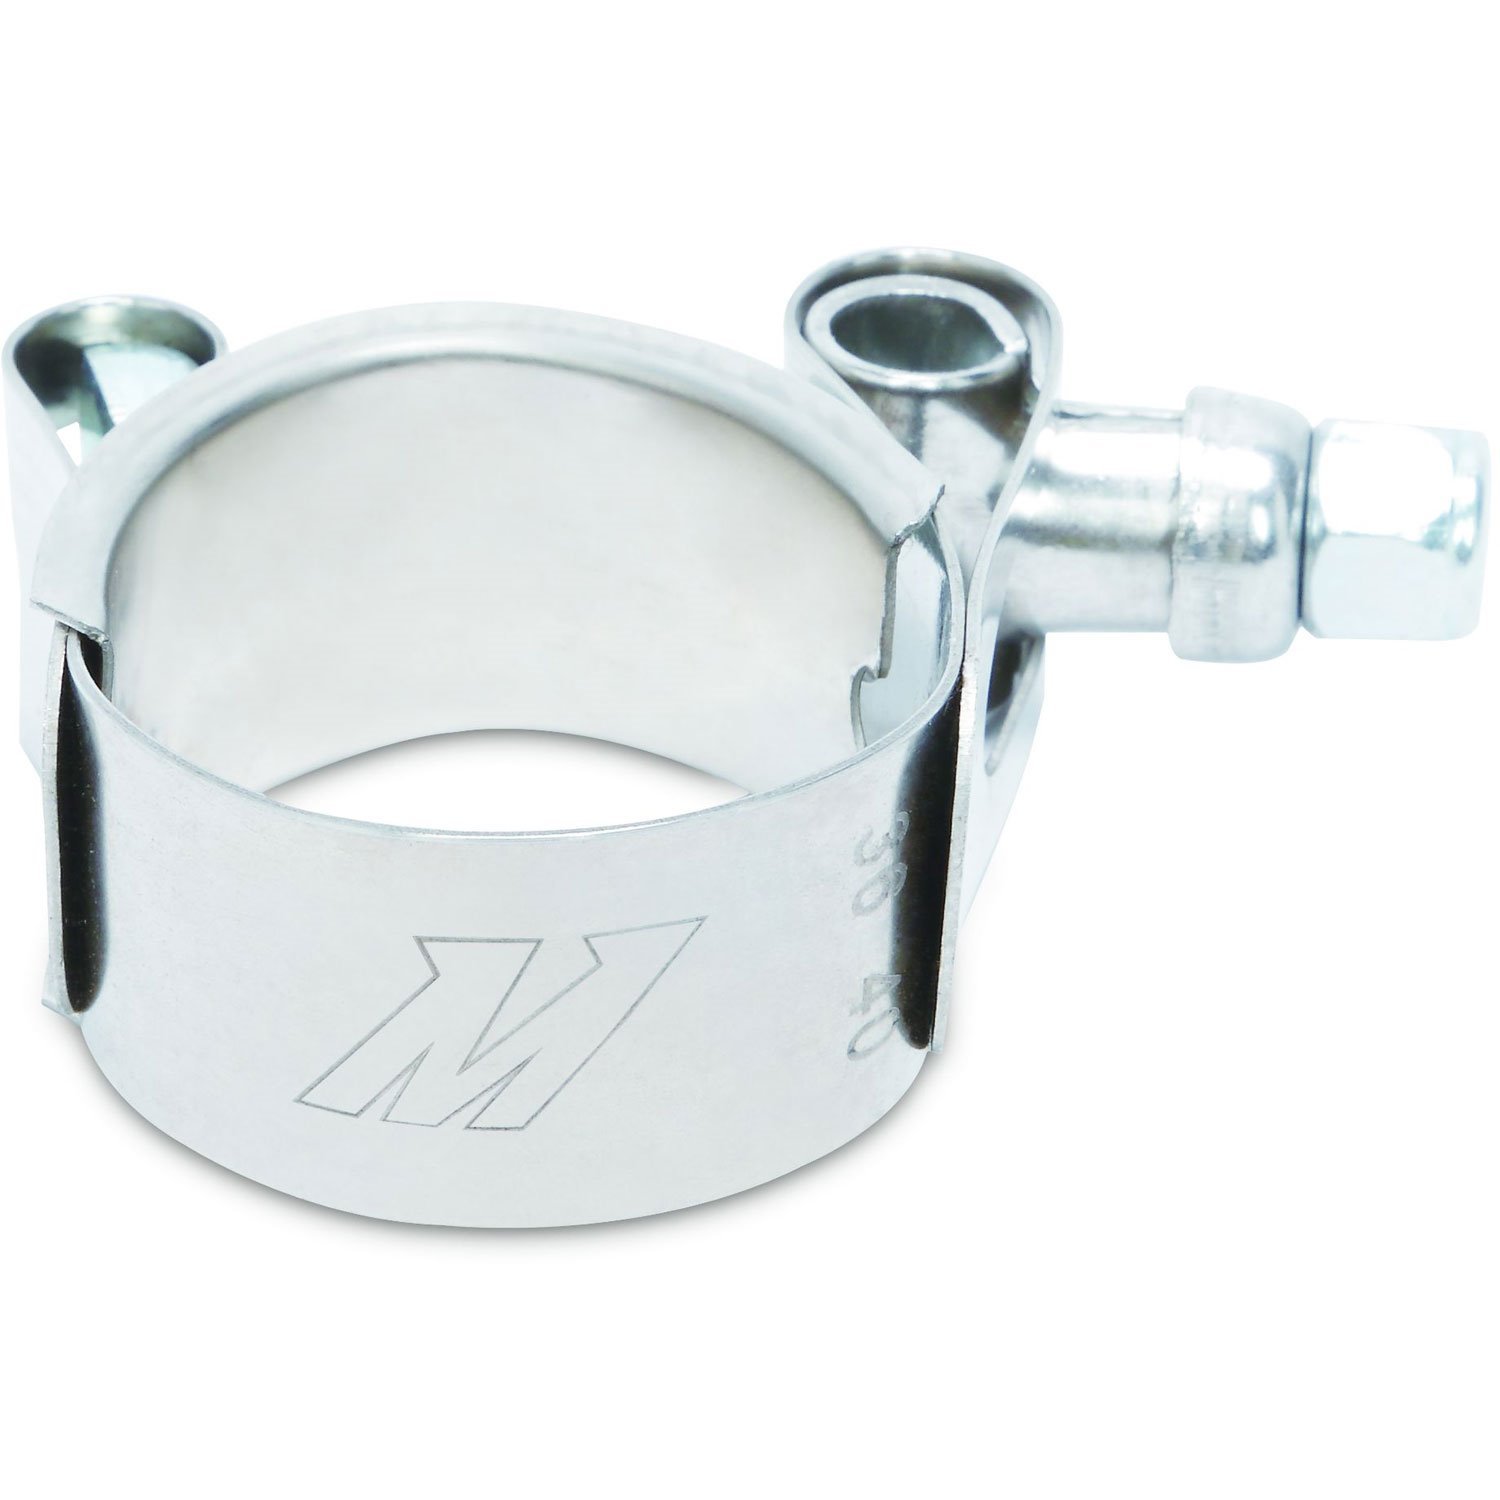 1.5" T-Bolt Hose Clamp 1.42" (36mm) to 1.57" (40mm) Clamping Range